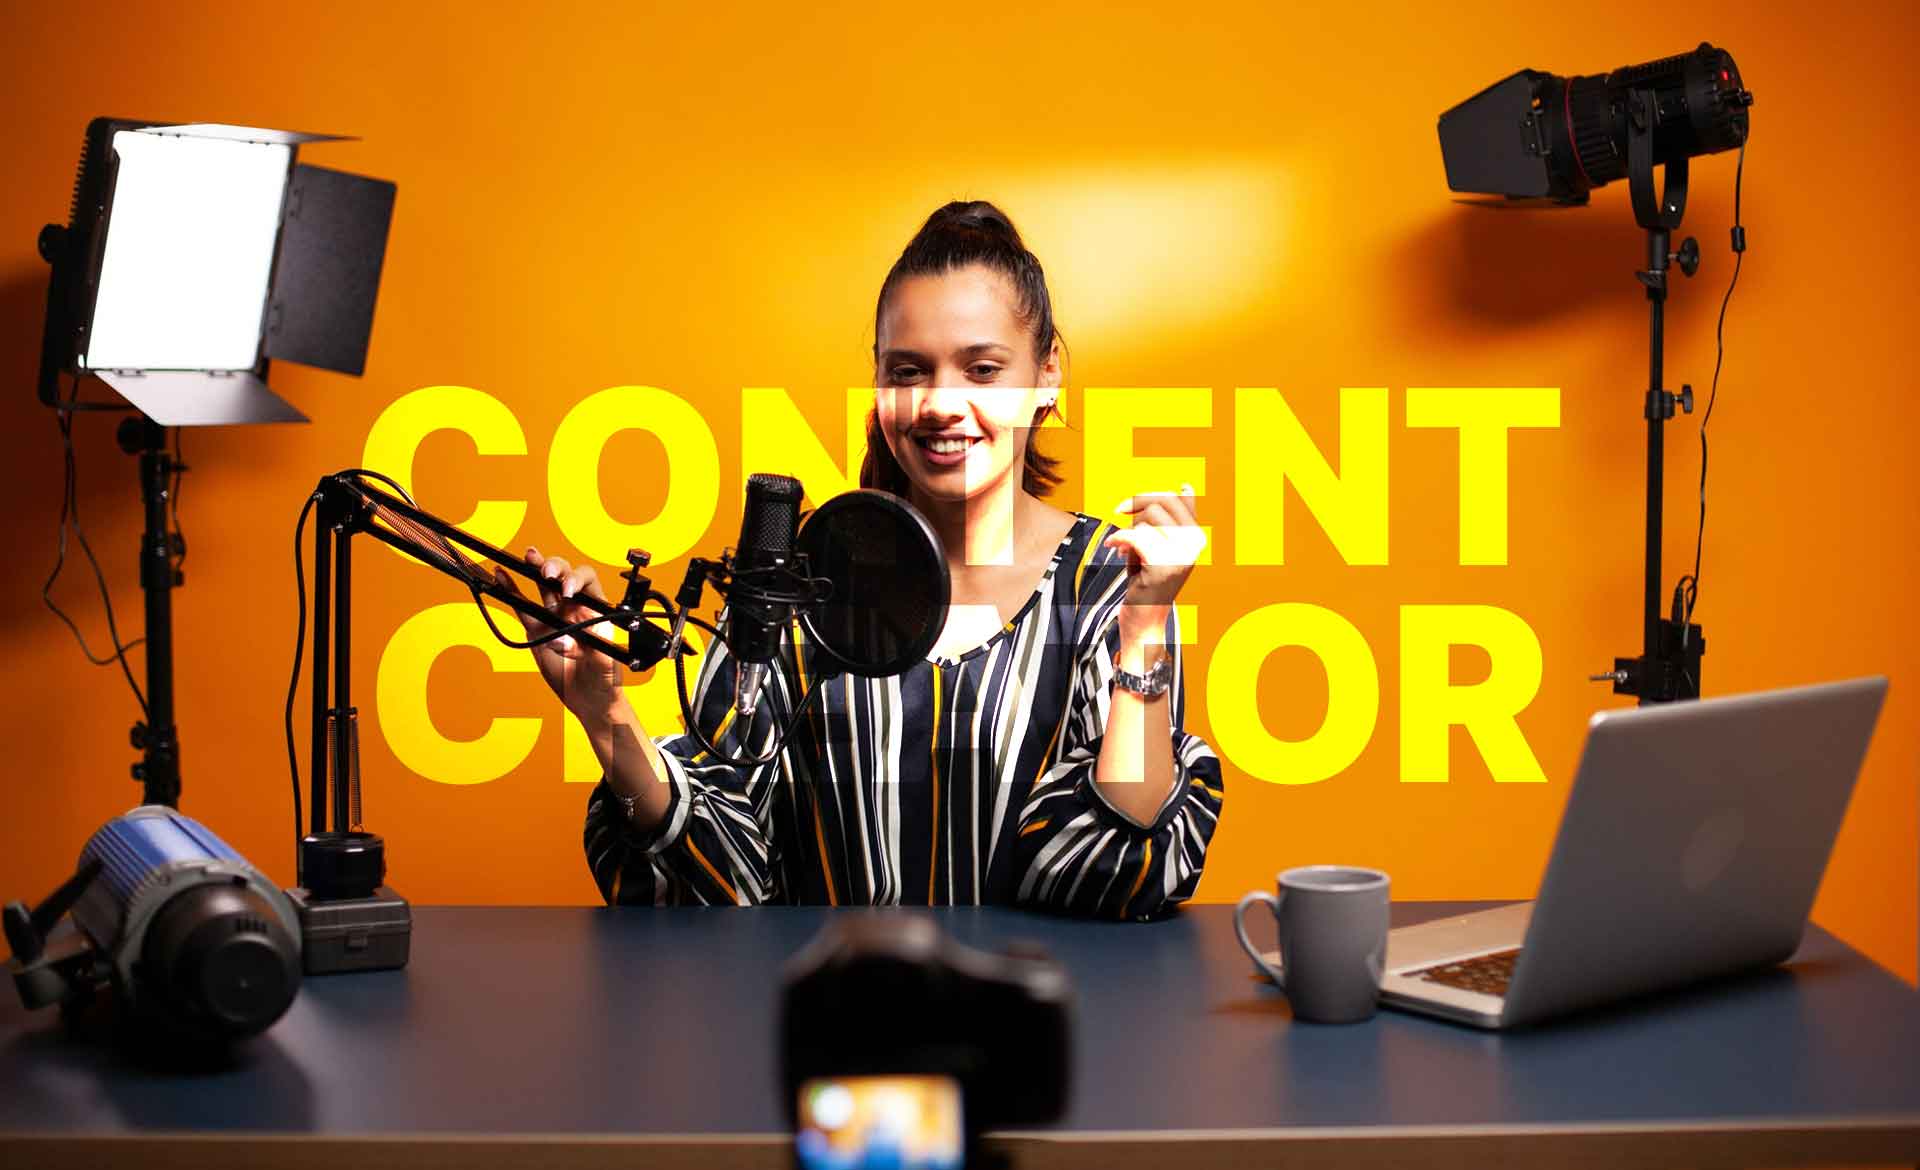 woman talking in front of camera to create engaging video content in her studio with orange background